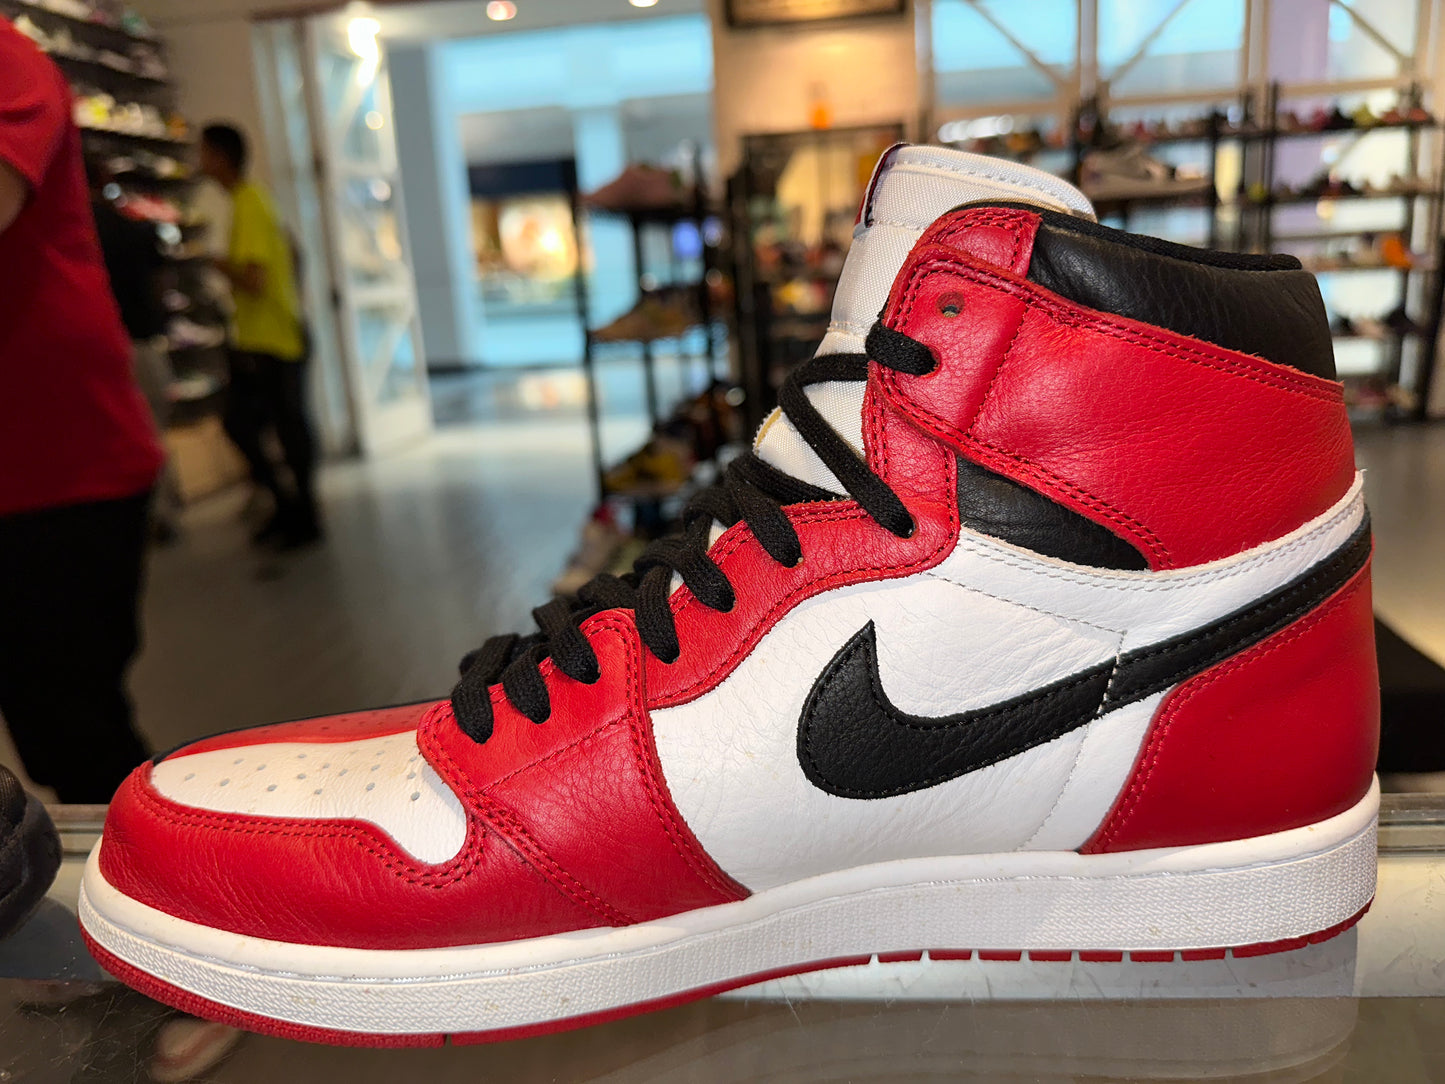 Size 12 Air Jordan 1 “Homage to Home” (Mall)